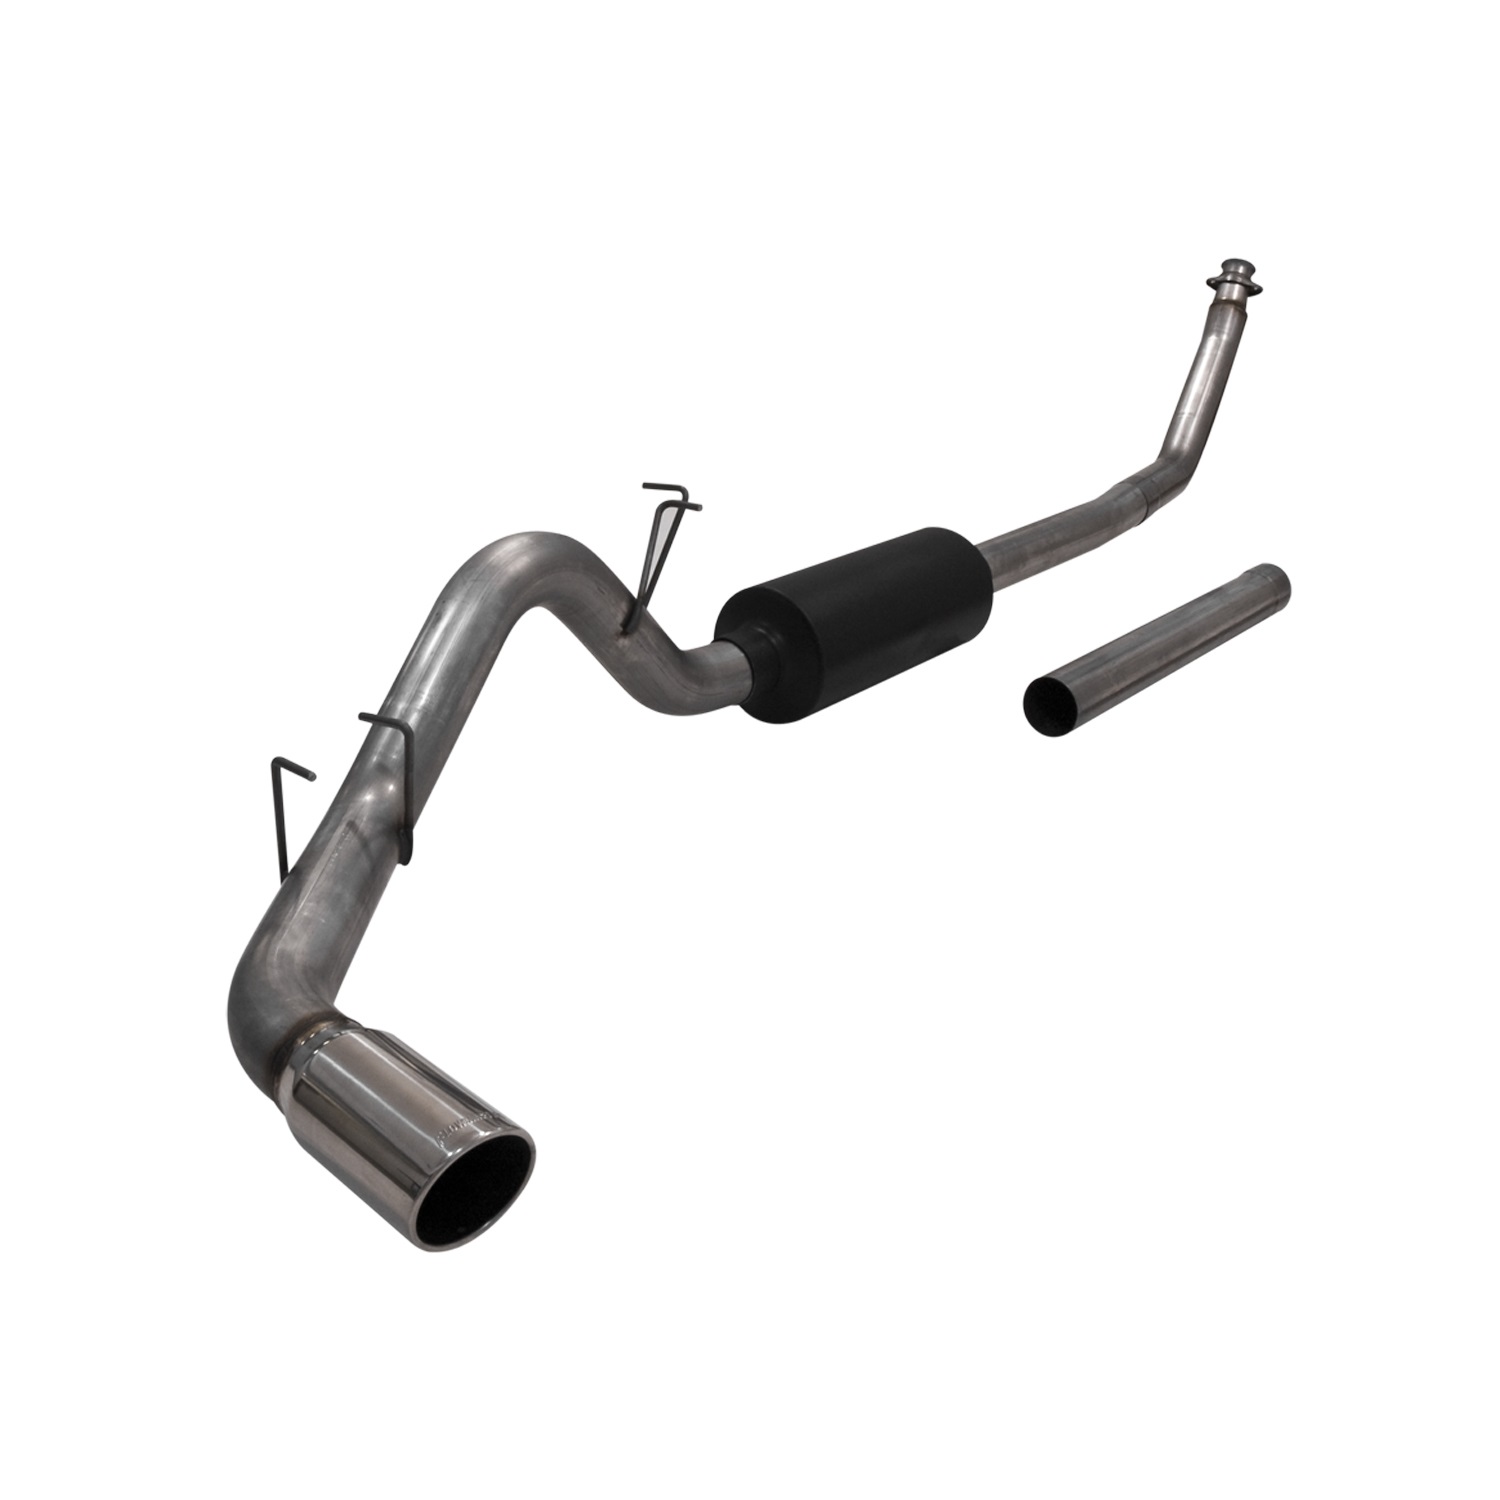 Flowmaster Flowmaster 817532 Force II Turbo Back Exhaust System Fits Ram 2500 Ram 3500